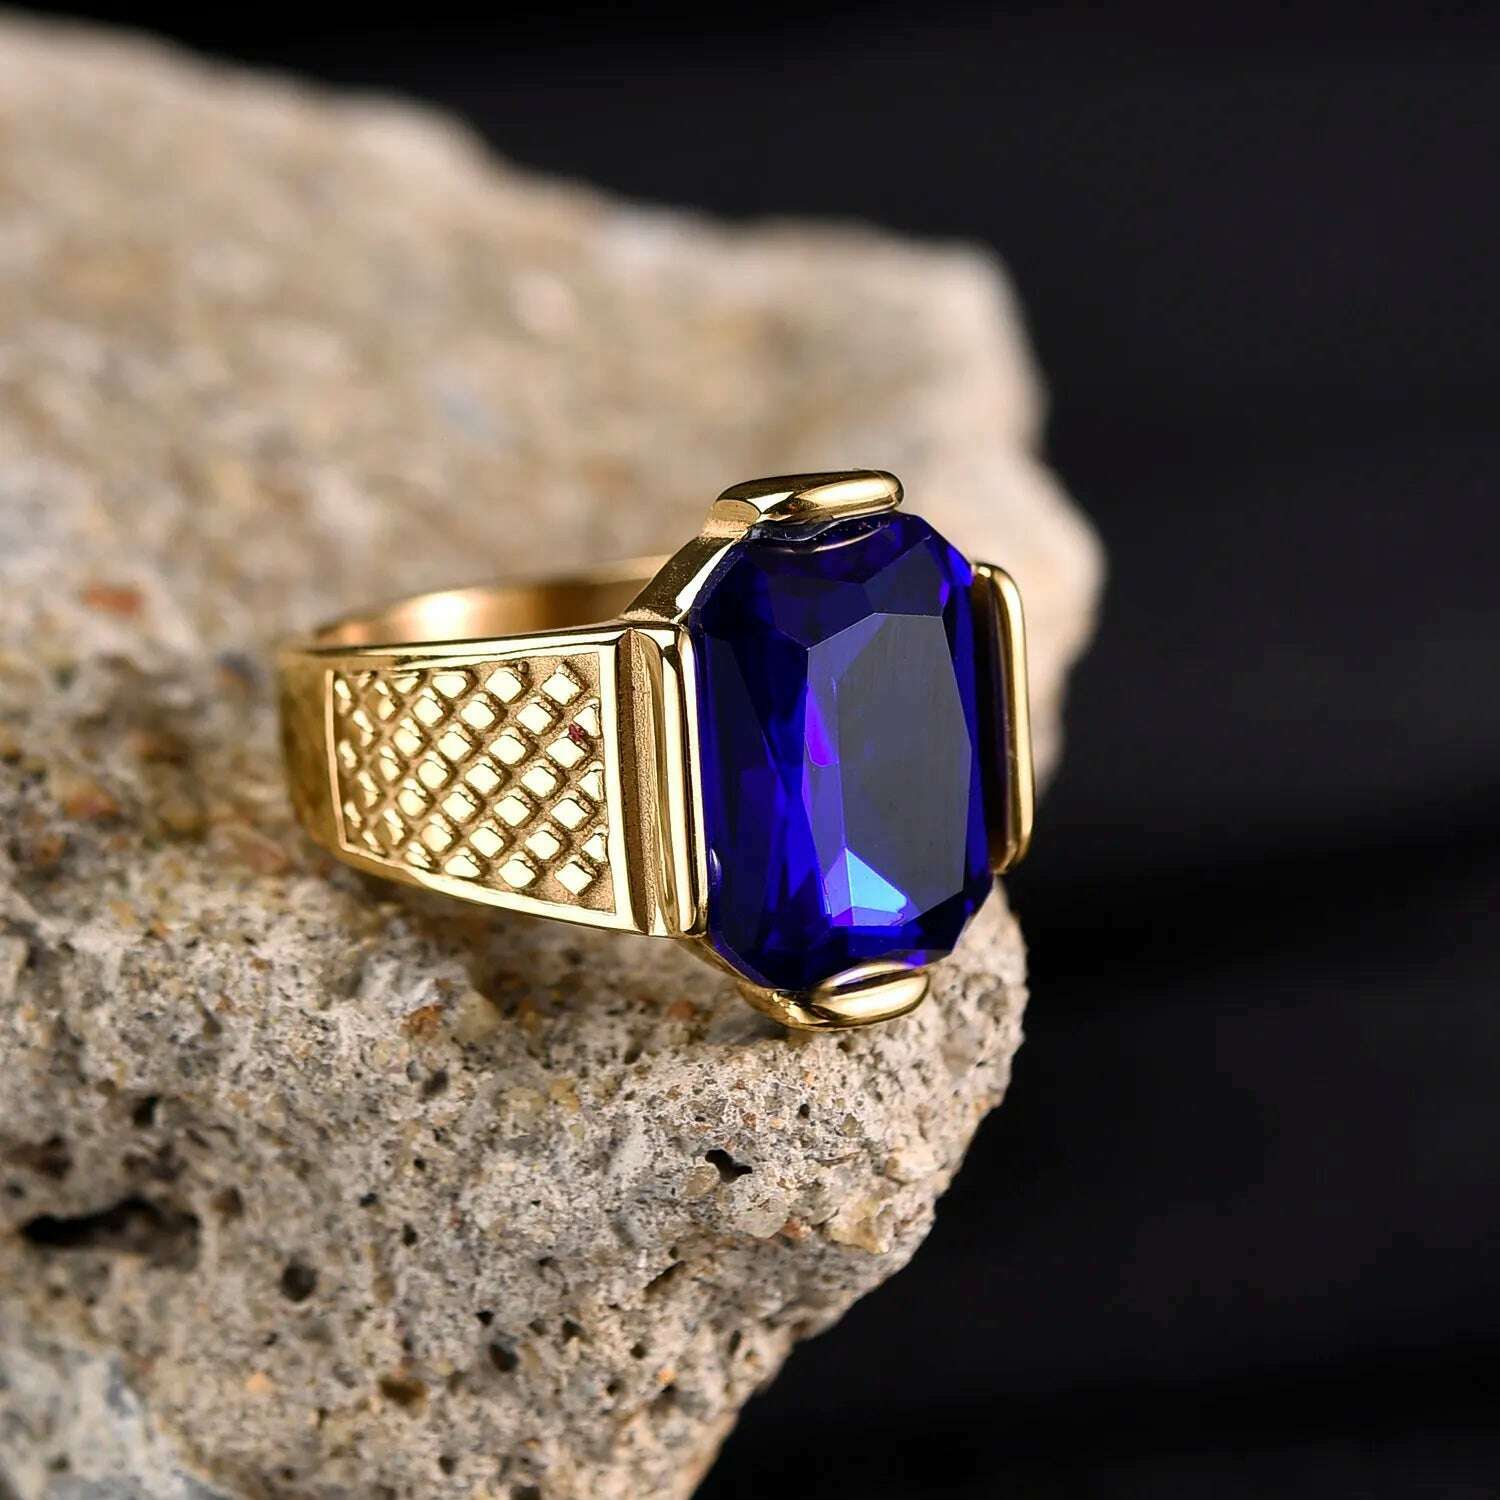 Men's High Quality Vintage Stainless Steel Gemstone Styles 18K Gold Plated Ring Jewelry Professional Factory Made, Blue / 8, KIMLUD Women's Clothes